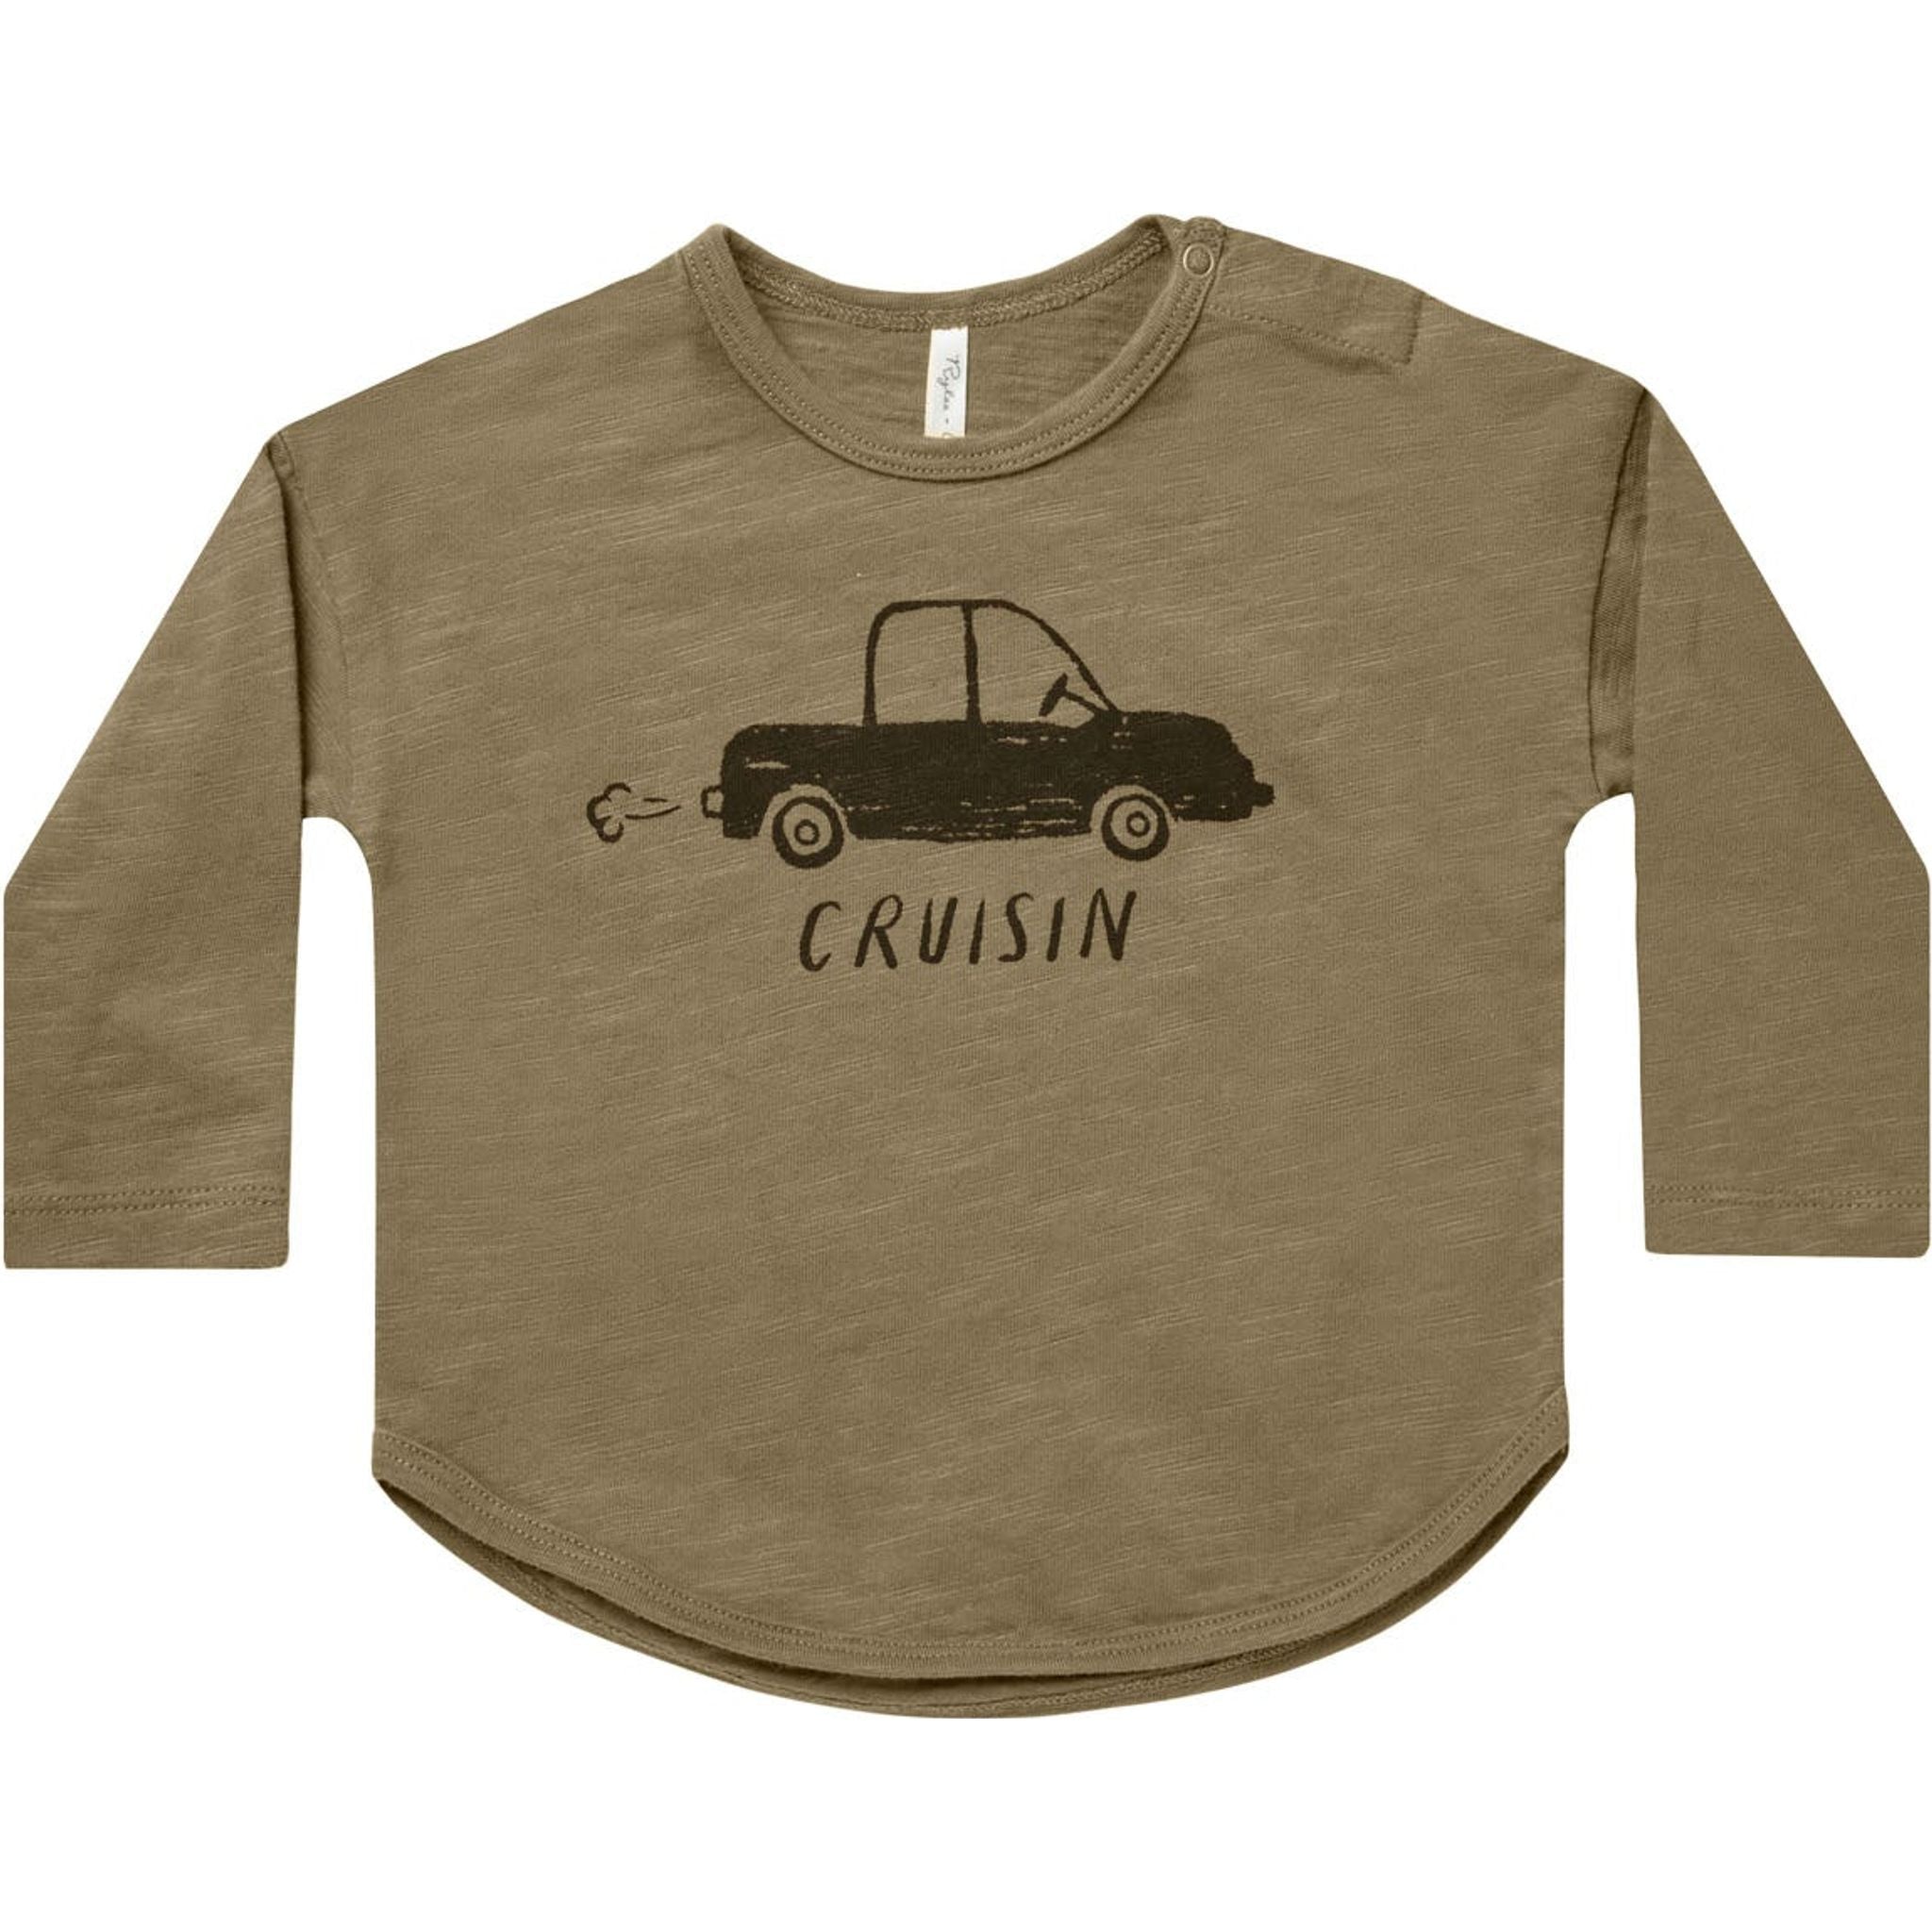 olive green long sleeve relaxted tee with car graphic and "cruisin" text